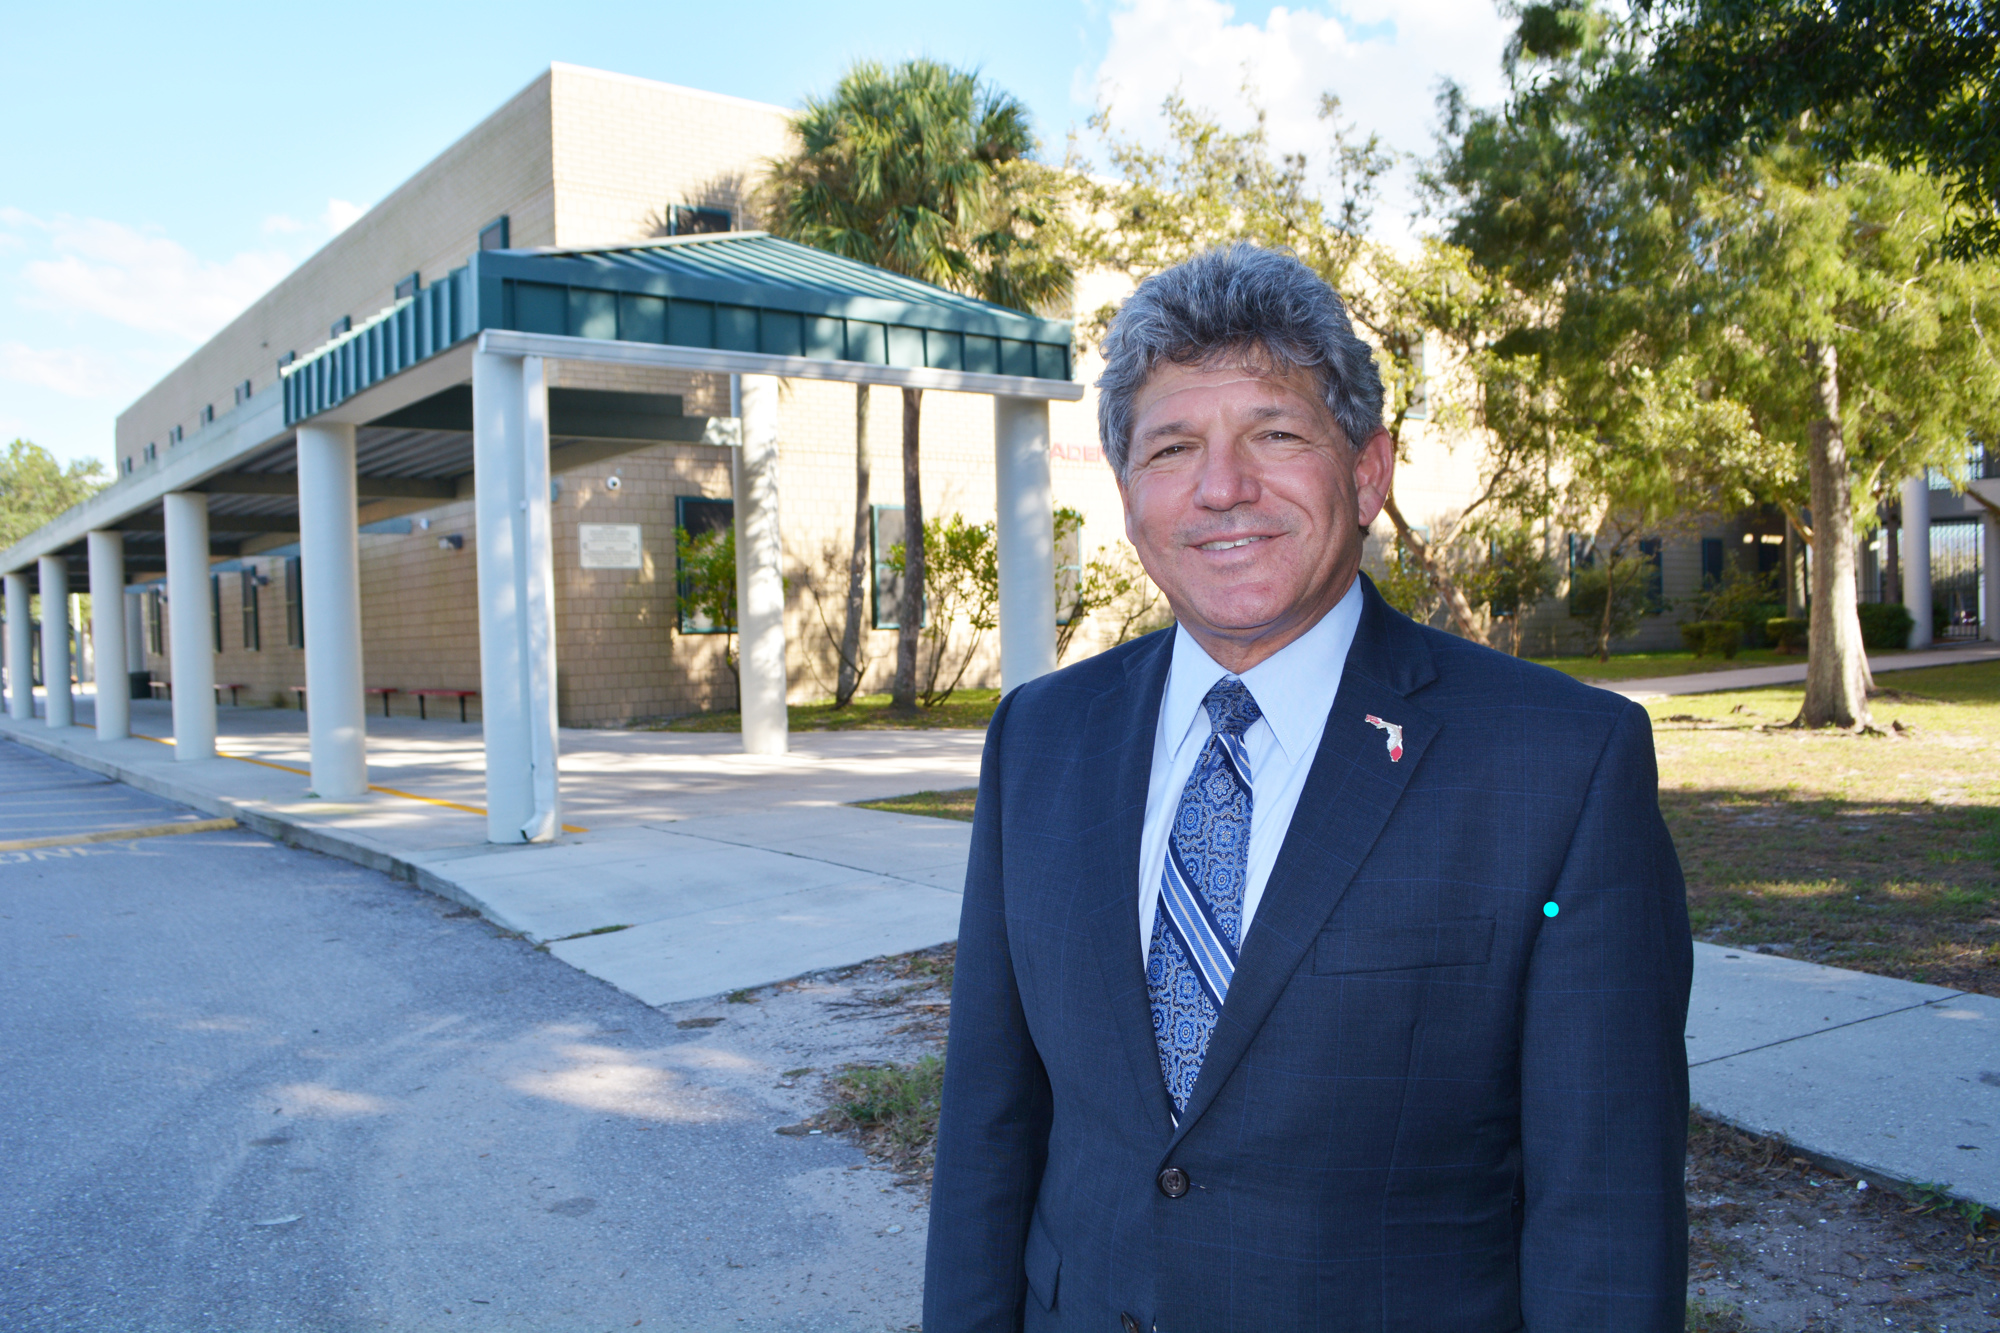 Scott Hopes will serve as county administrator while also serving on the School Board of Manatee County until Gov. Ron DeSantis appoints someone to replace him. File photo.